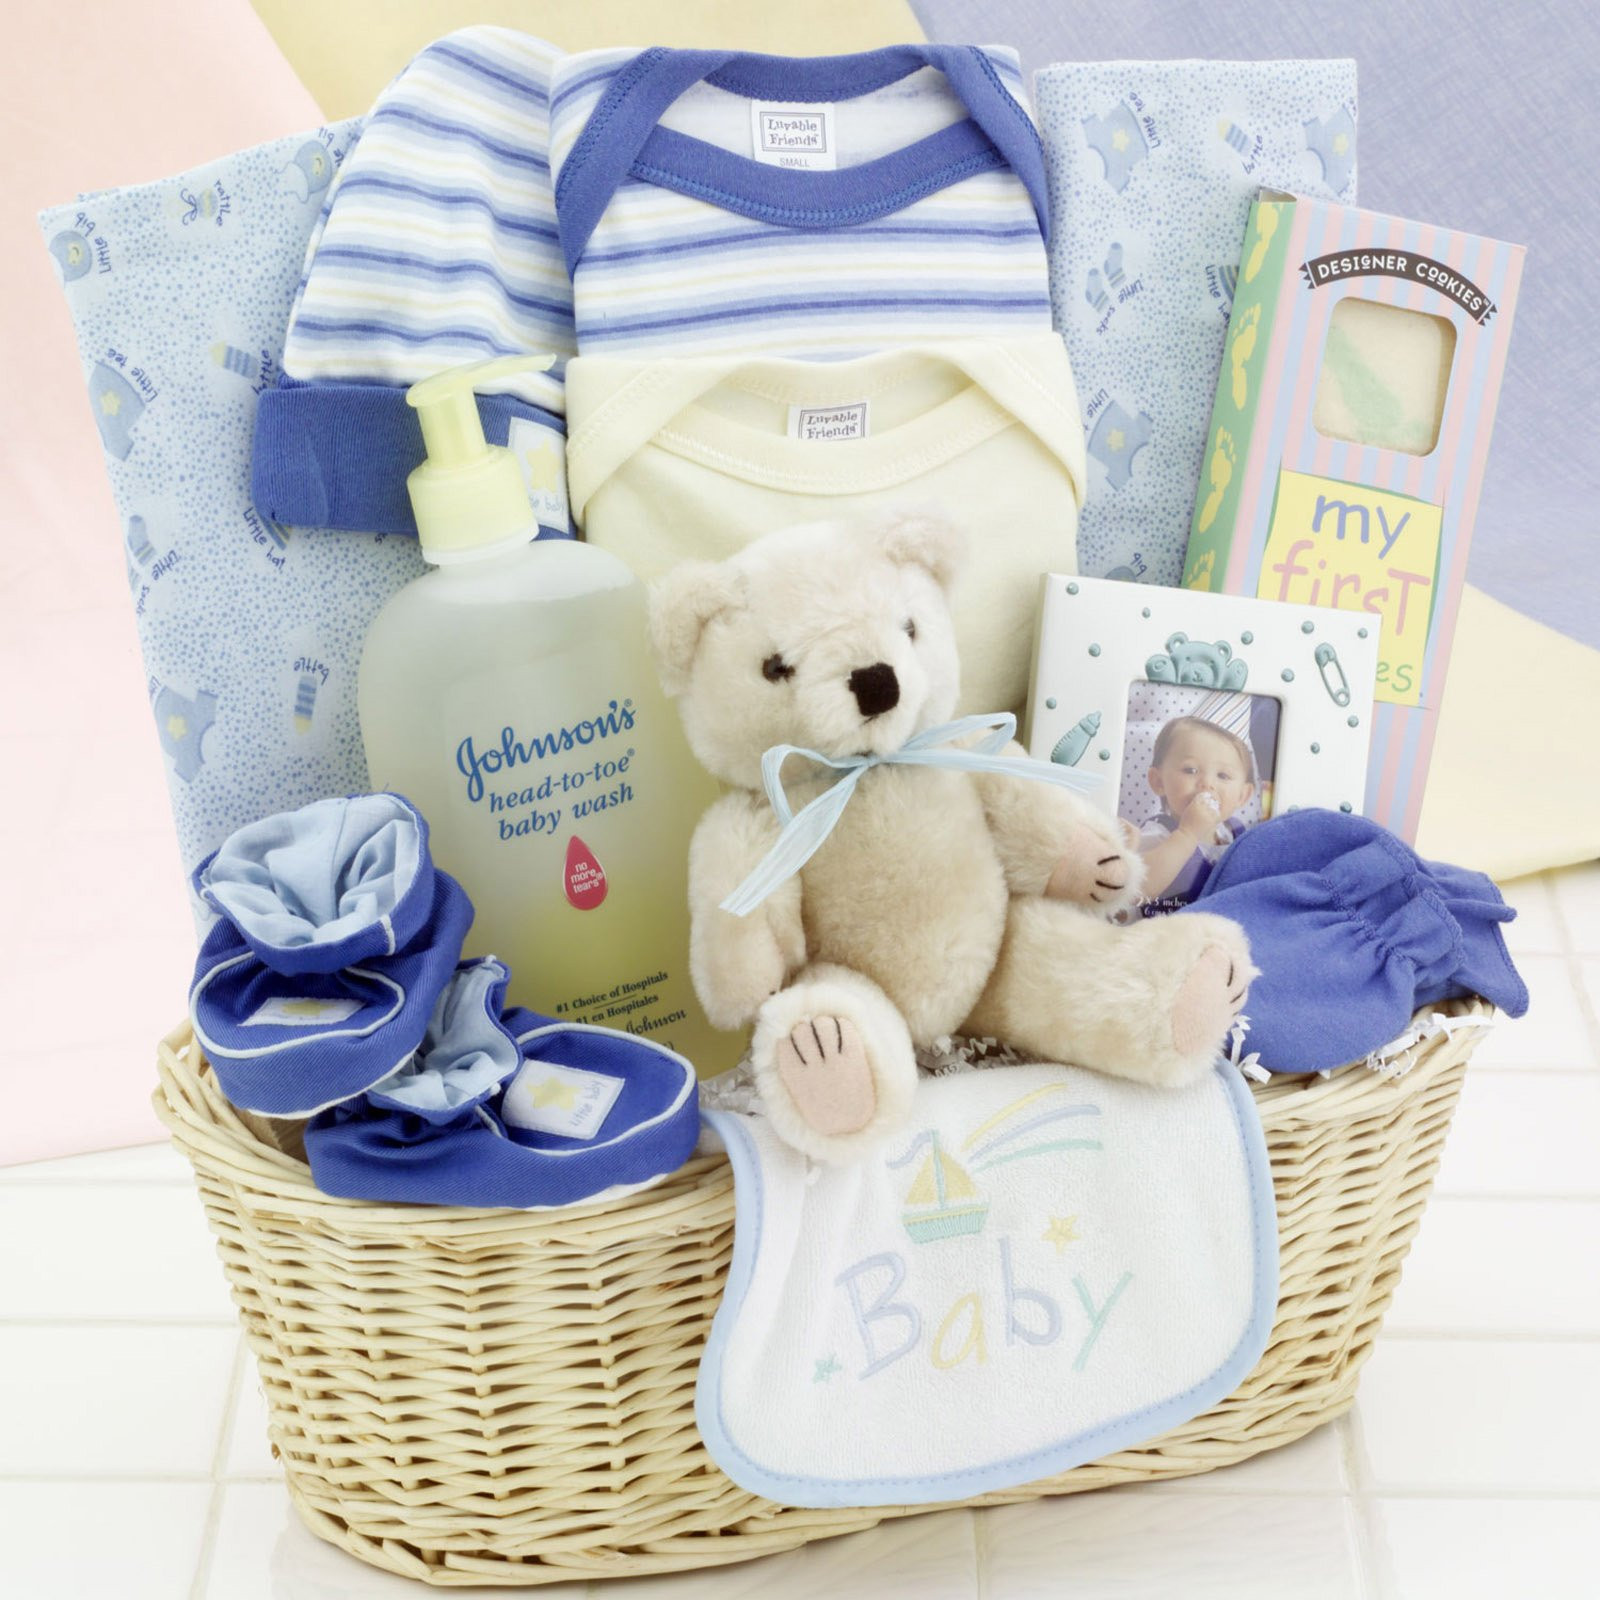 New Born Baby Boy Gifts
 Gift Baskets Created News Arrival Baby Boy Gift Basket